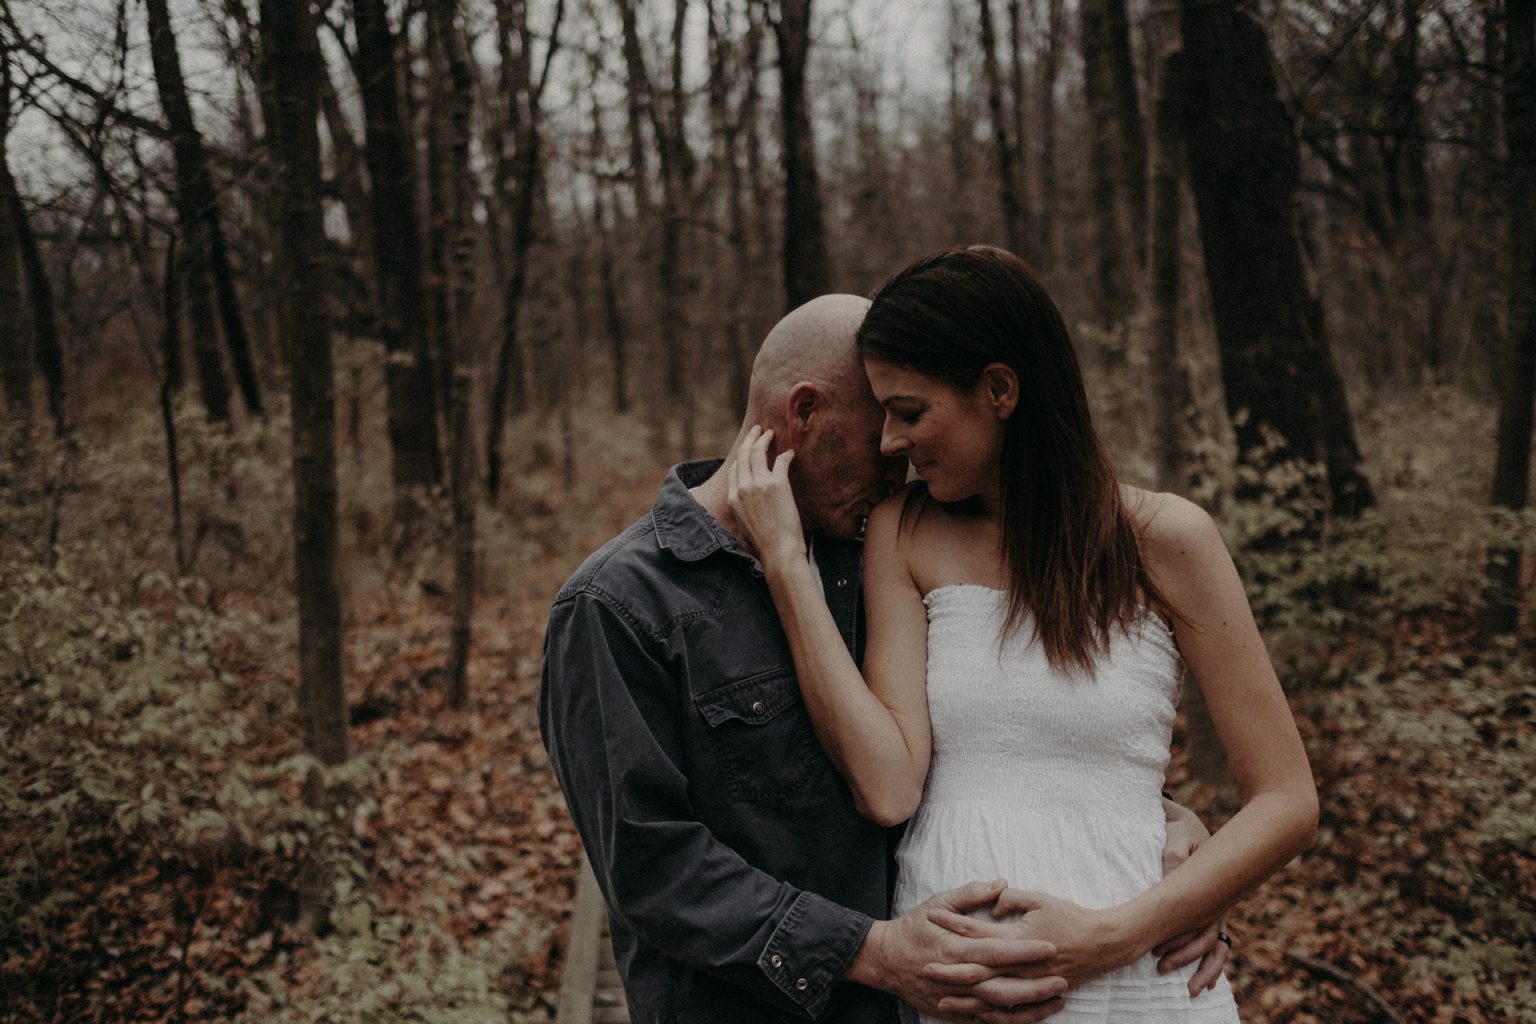 man pregnant woman woods forest illinois hugging